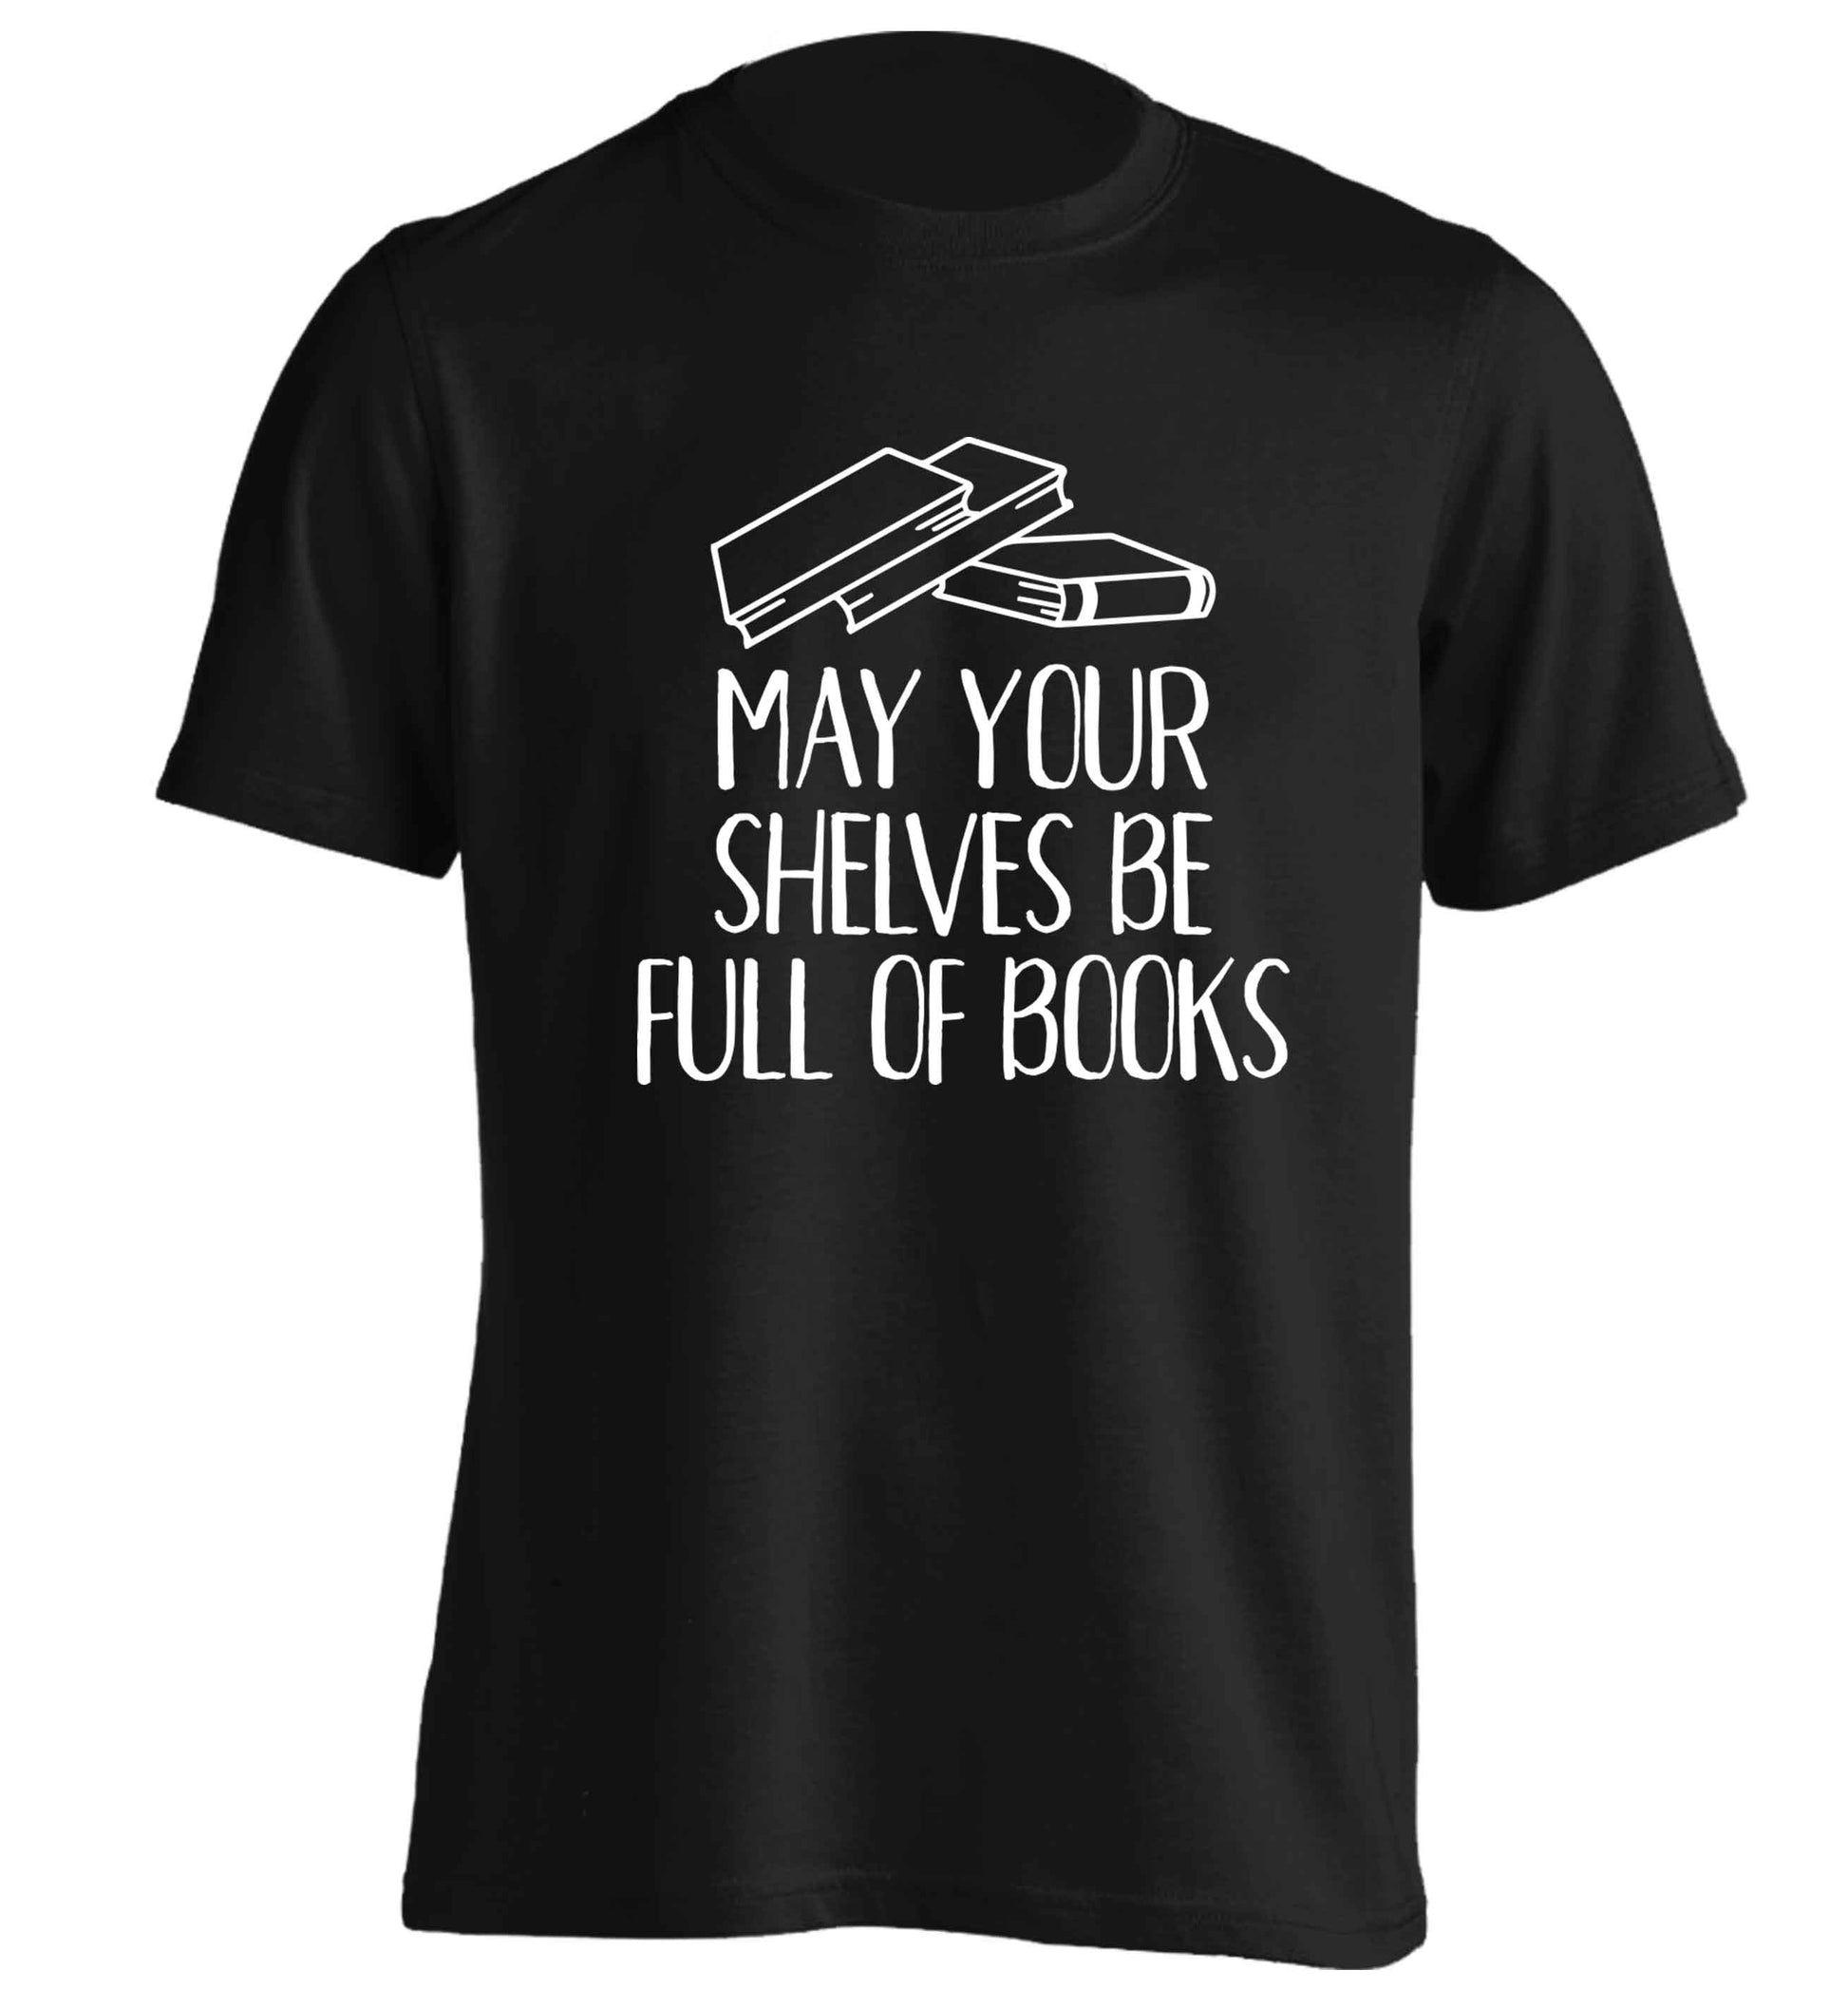 May your shelves be full of books adults unisex black Tshirt 2XL